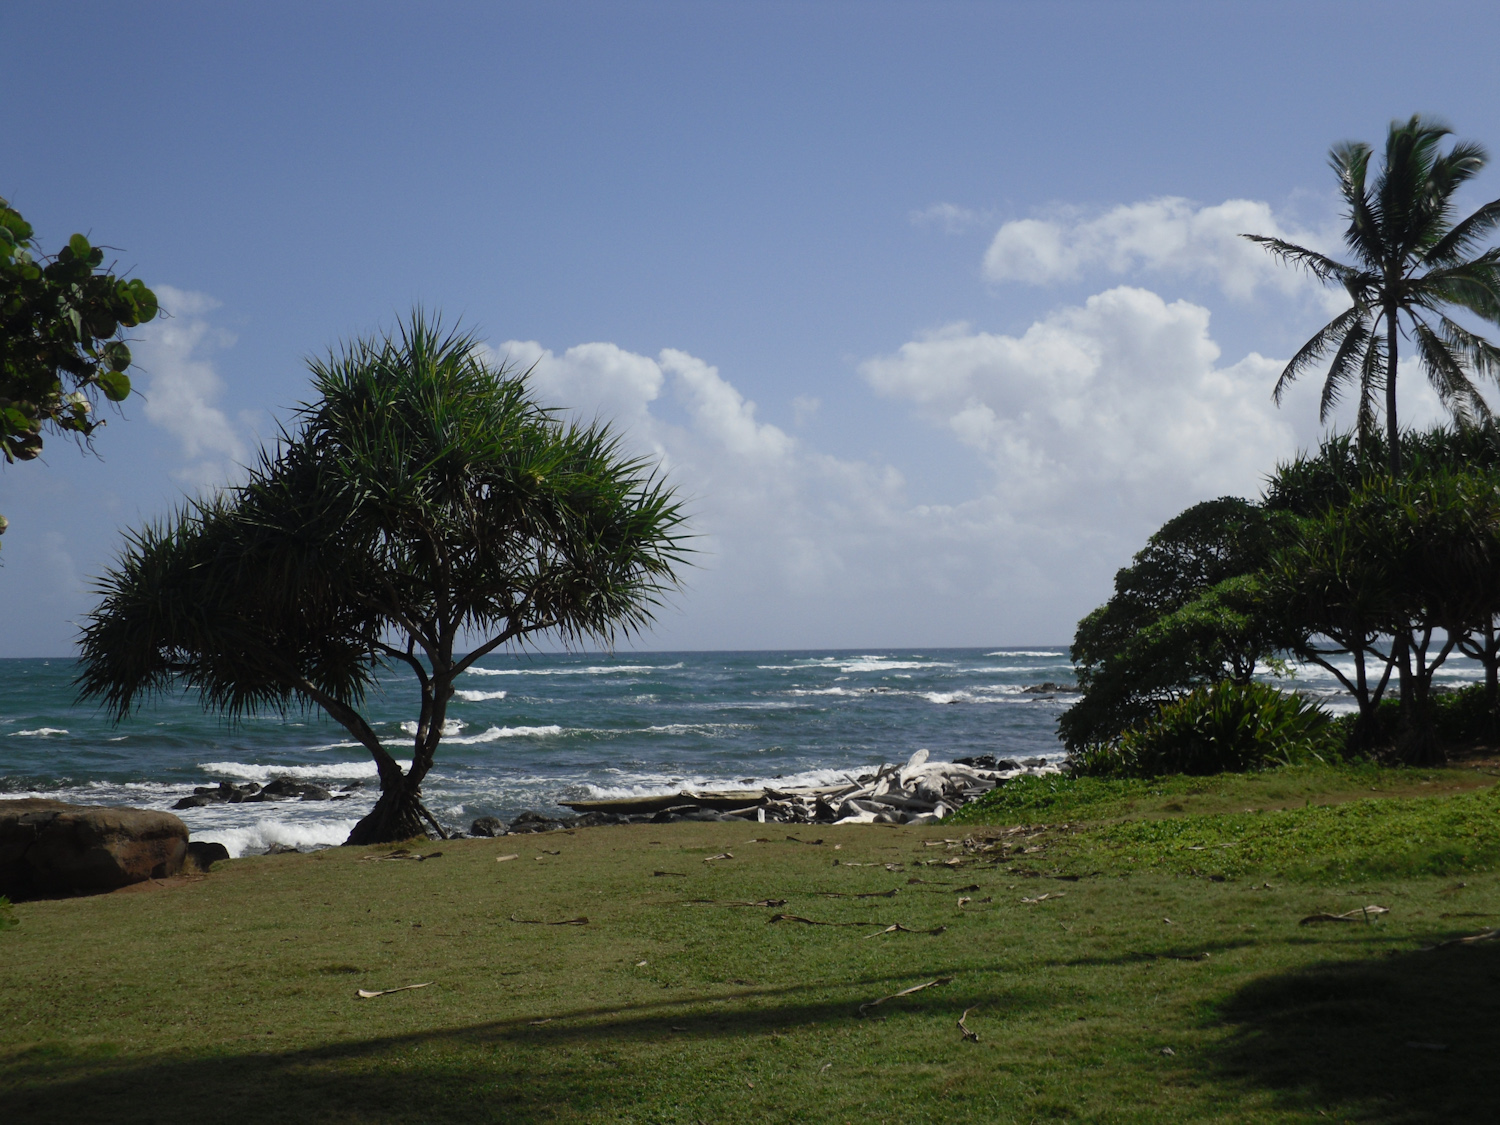 Ocean view from Lydgate State Park near Kapaa.